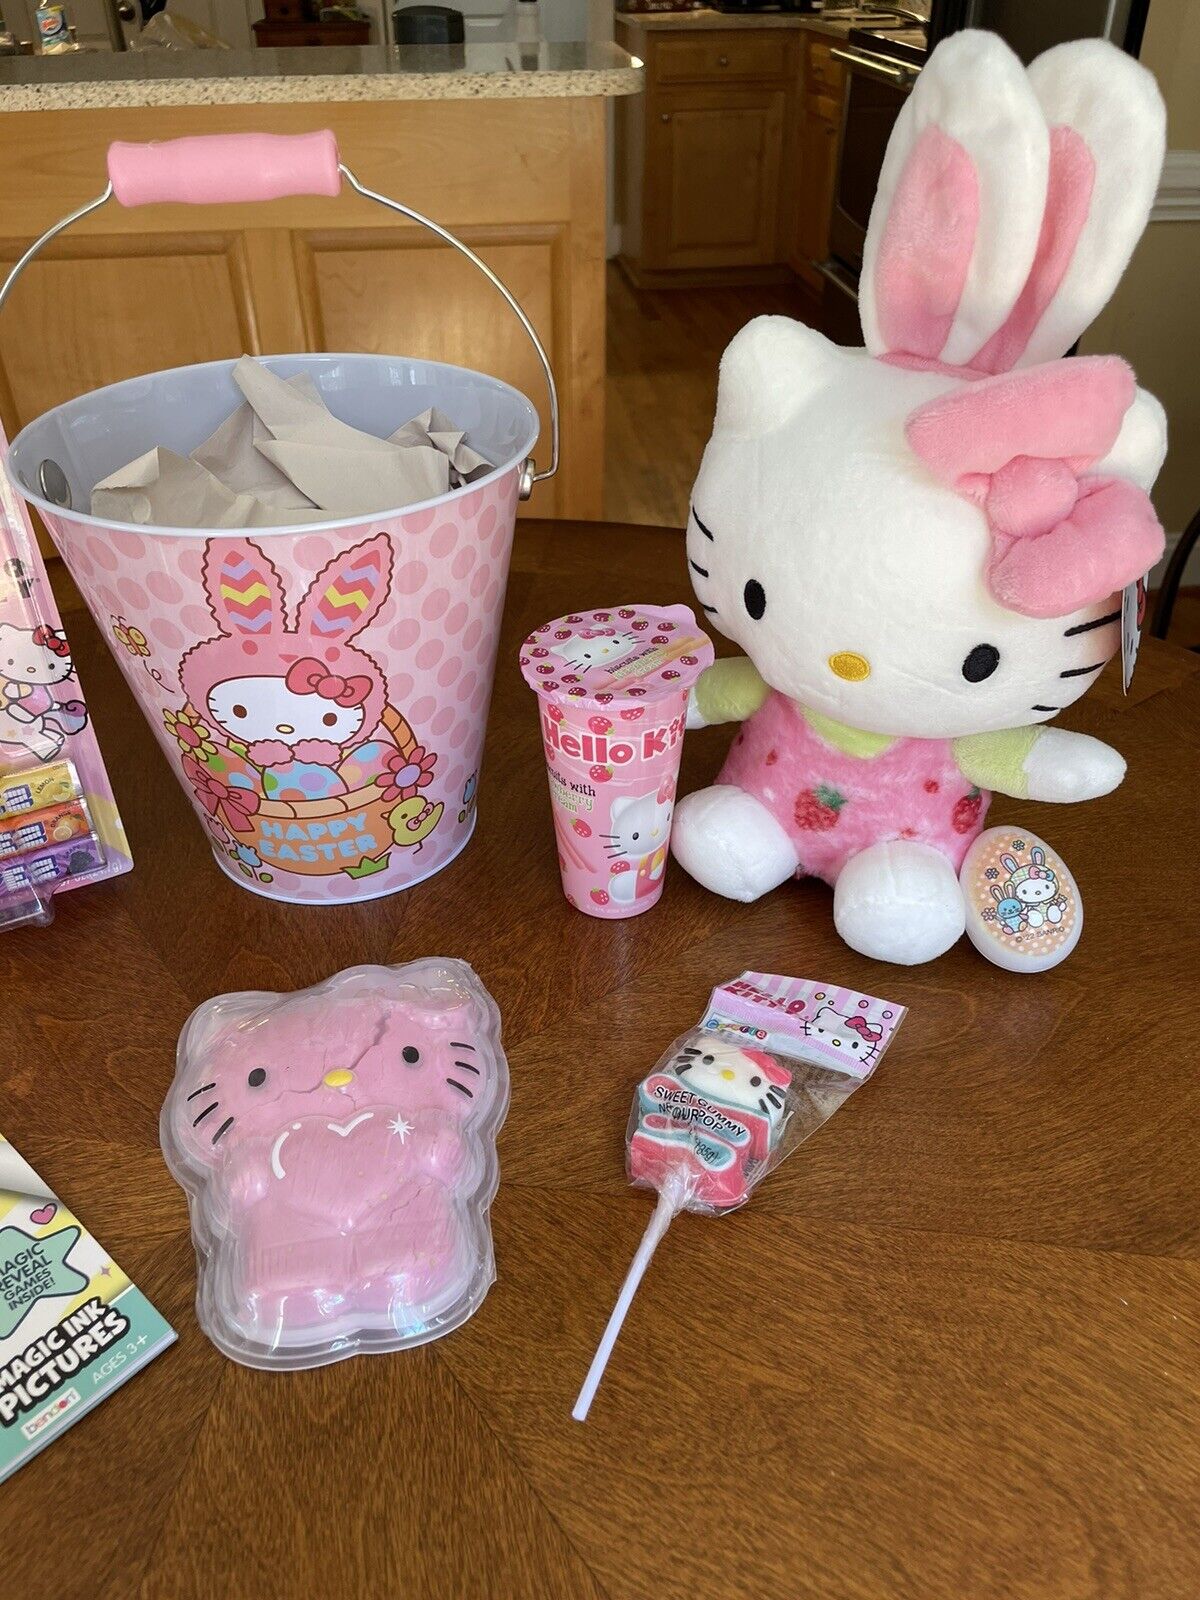 Hello Kitty Jumbo Coloring and Activity Book “Let’s Go” NEW Easter Basket  Gift